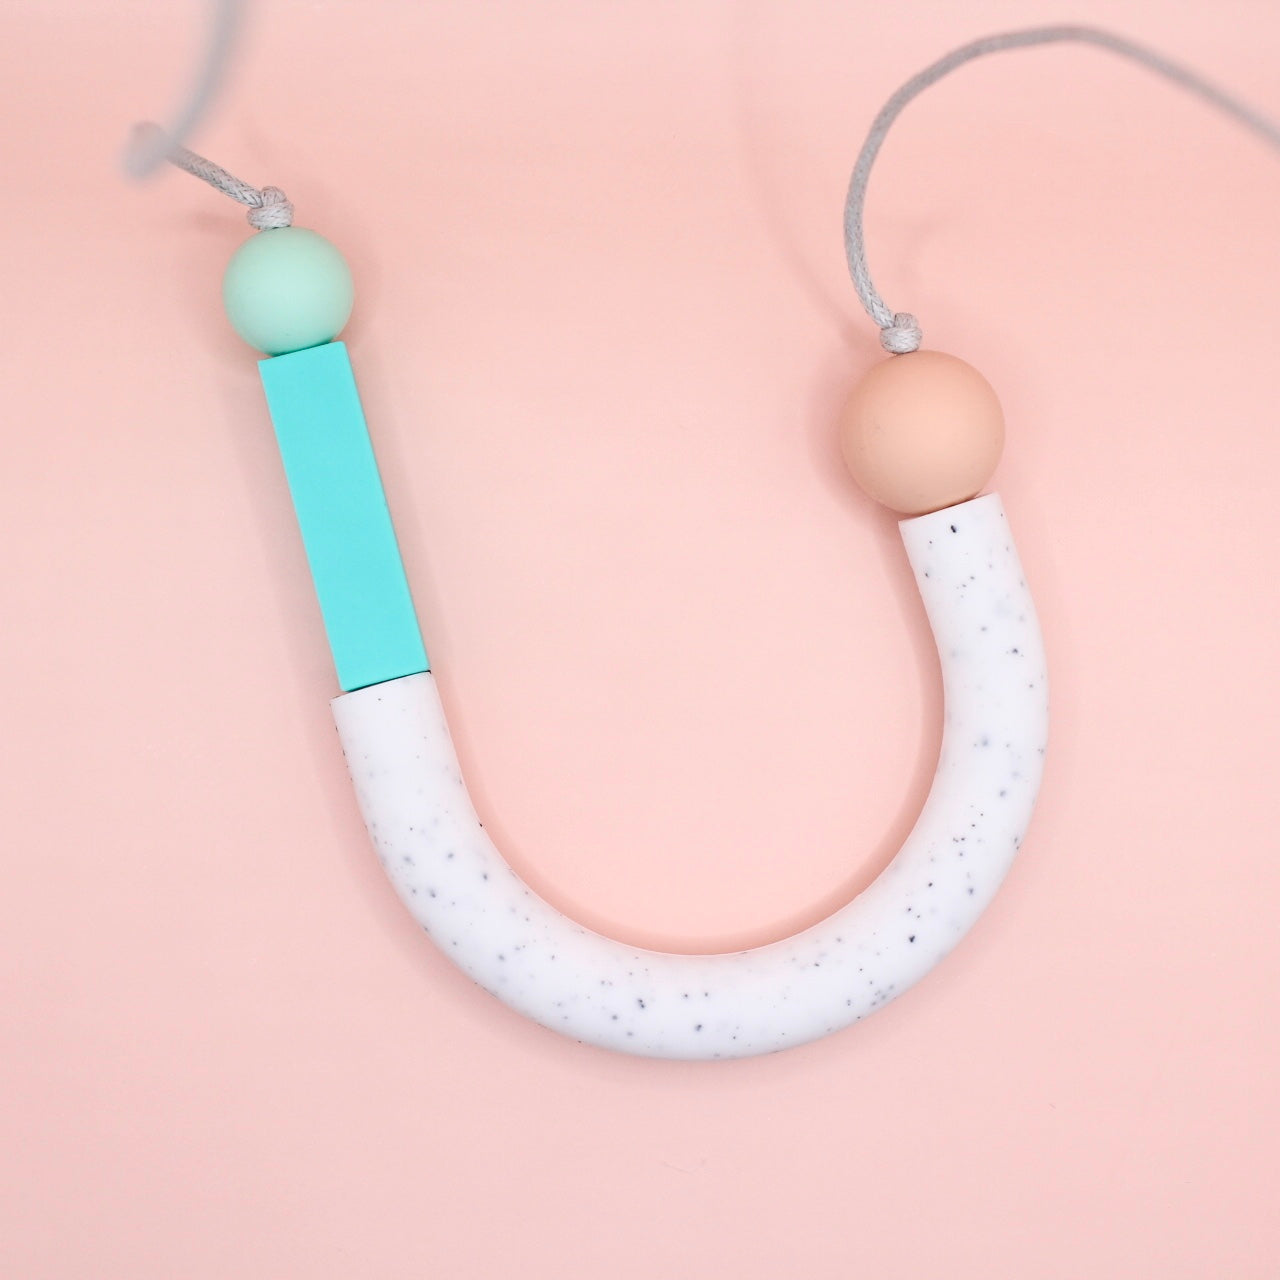 Silicone Necklace - Baby Friendly, Asymmetrical Necklace, BPA Free, Breastfeeding, Feeding Necklace